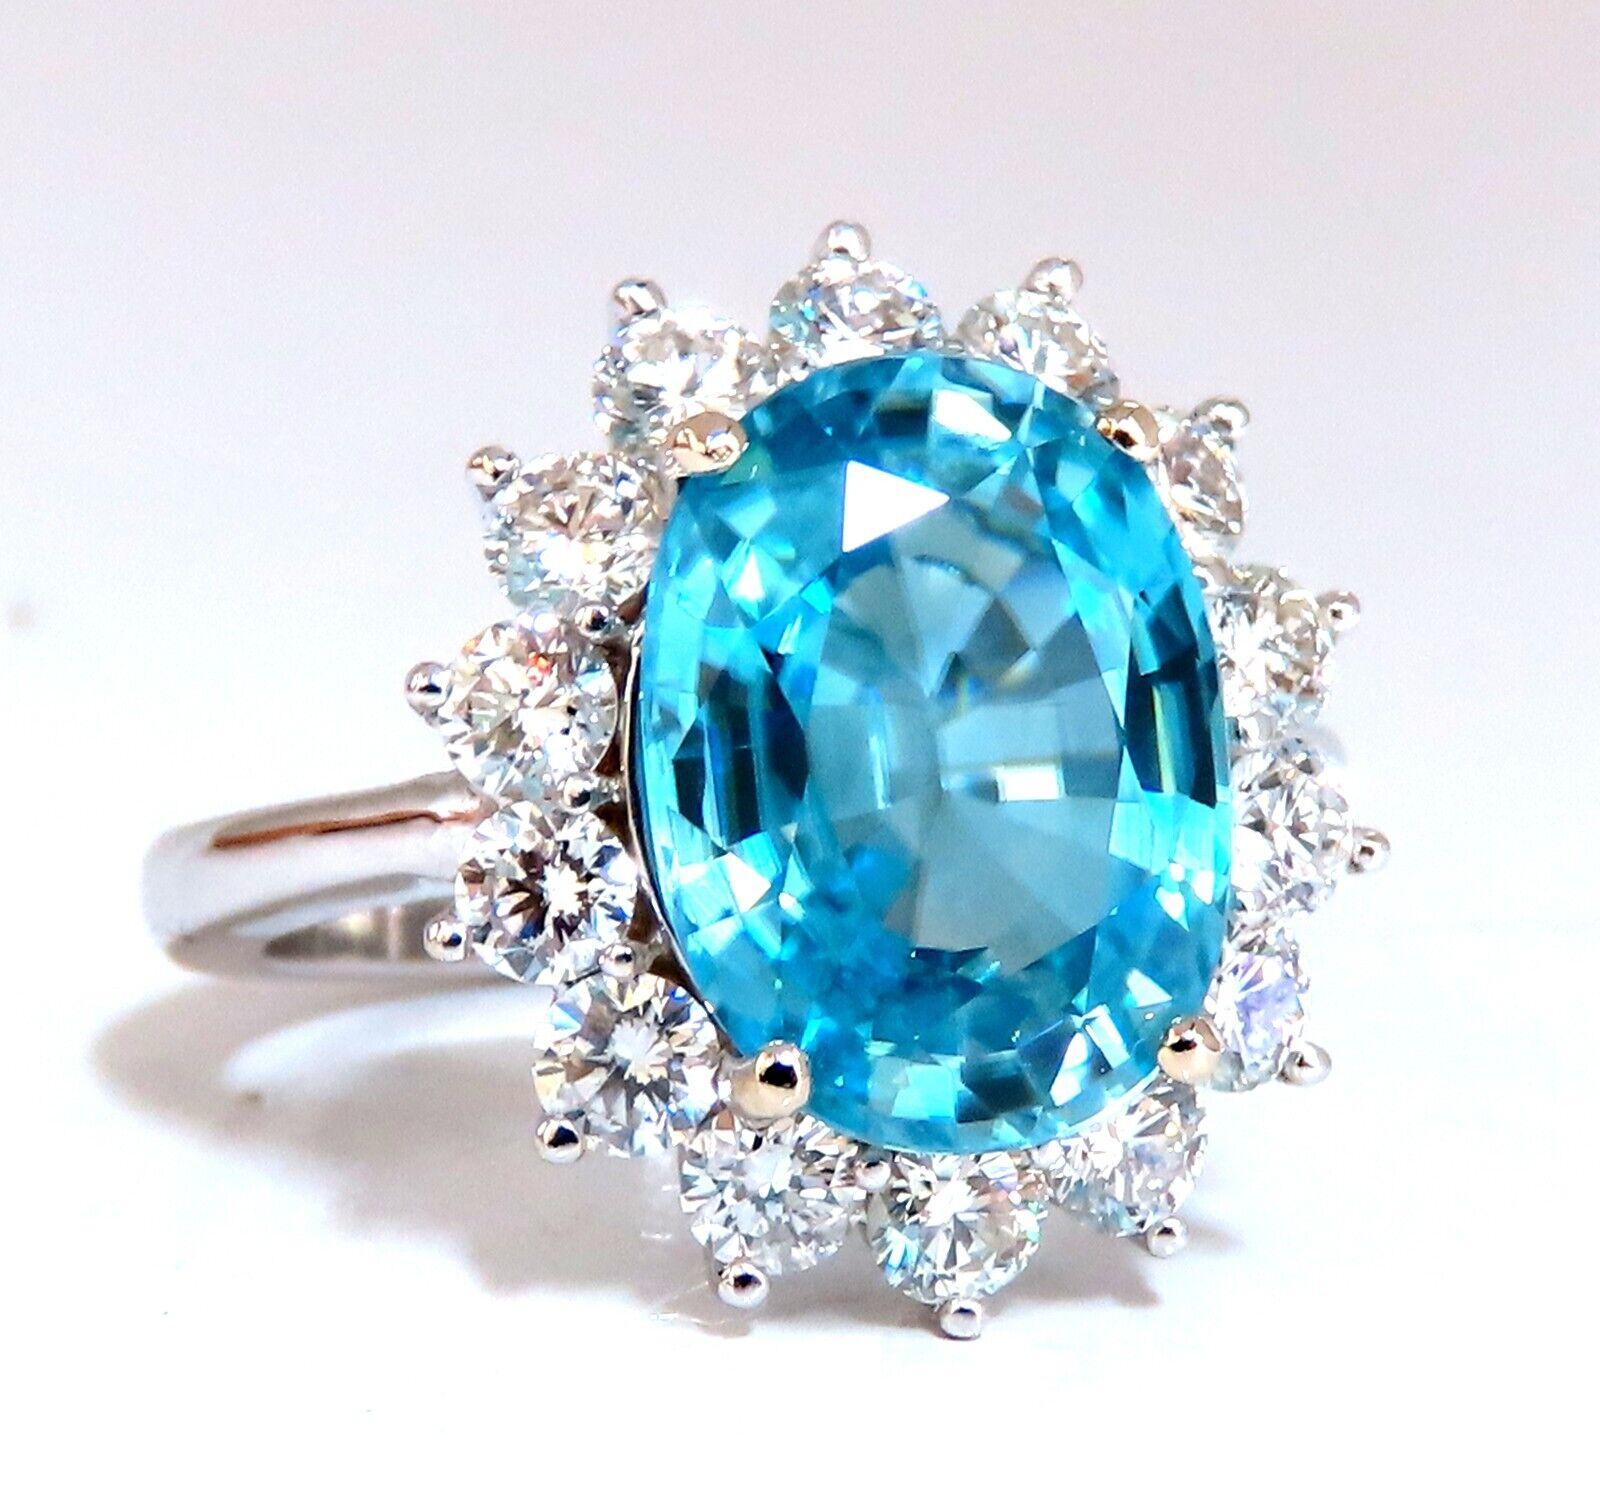 Indigo Blue Natural Zircon ring.

7.22ct. Natural Blue Zircon Oval cut

13 X 9.8mm

VS Clean Clarity, Transparent

1.80ct Side Full cut natural round diamonds G-colors & Vs-2 clarity

18kt. White gold

9.4 grams

Ring Current size: 7.5

depth of